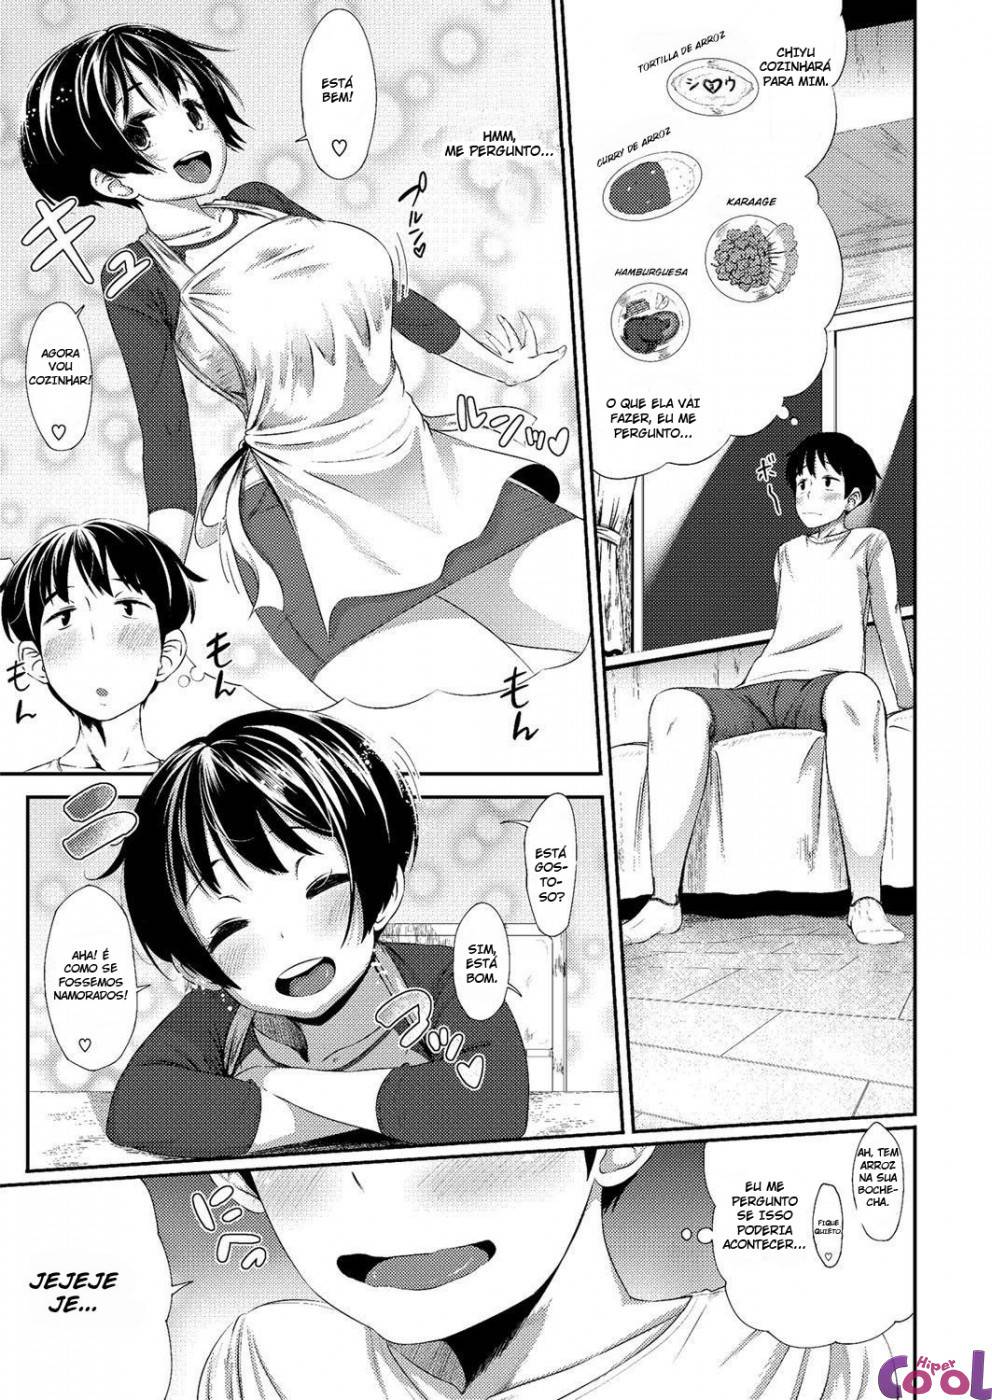 hatsukoi-delusion-chapter-02-page-04.jpg